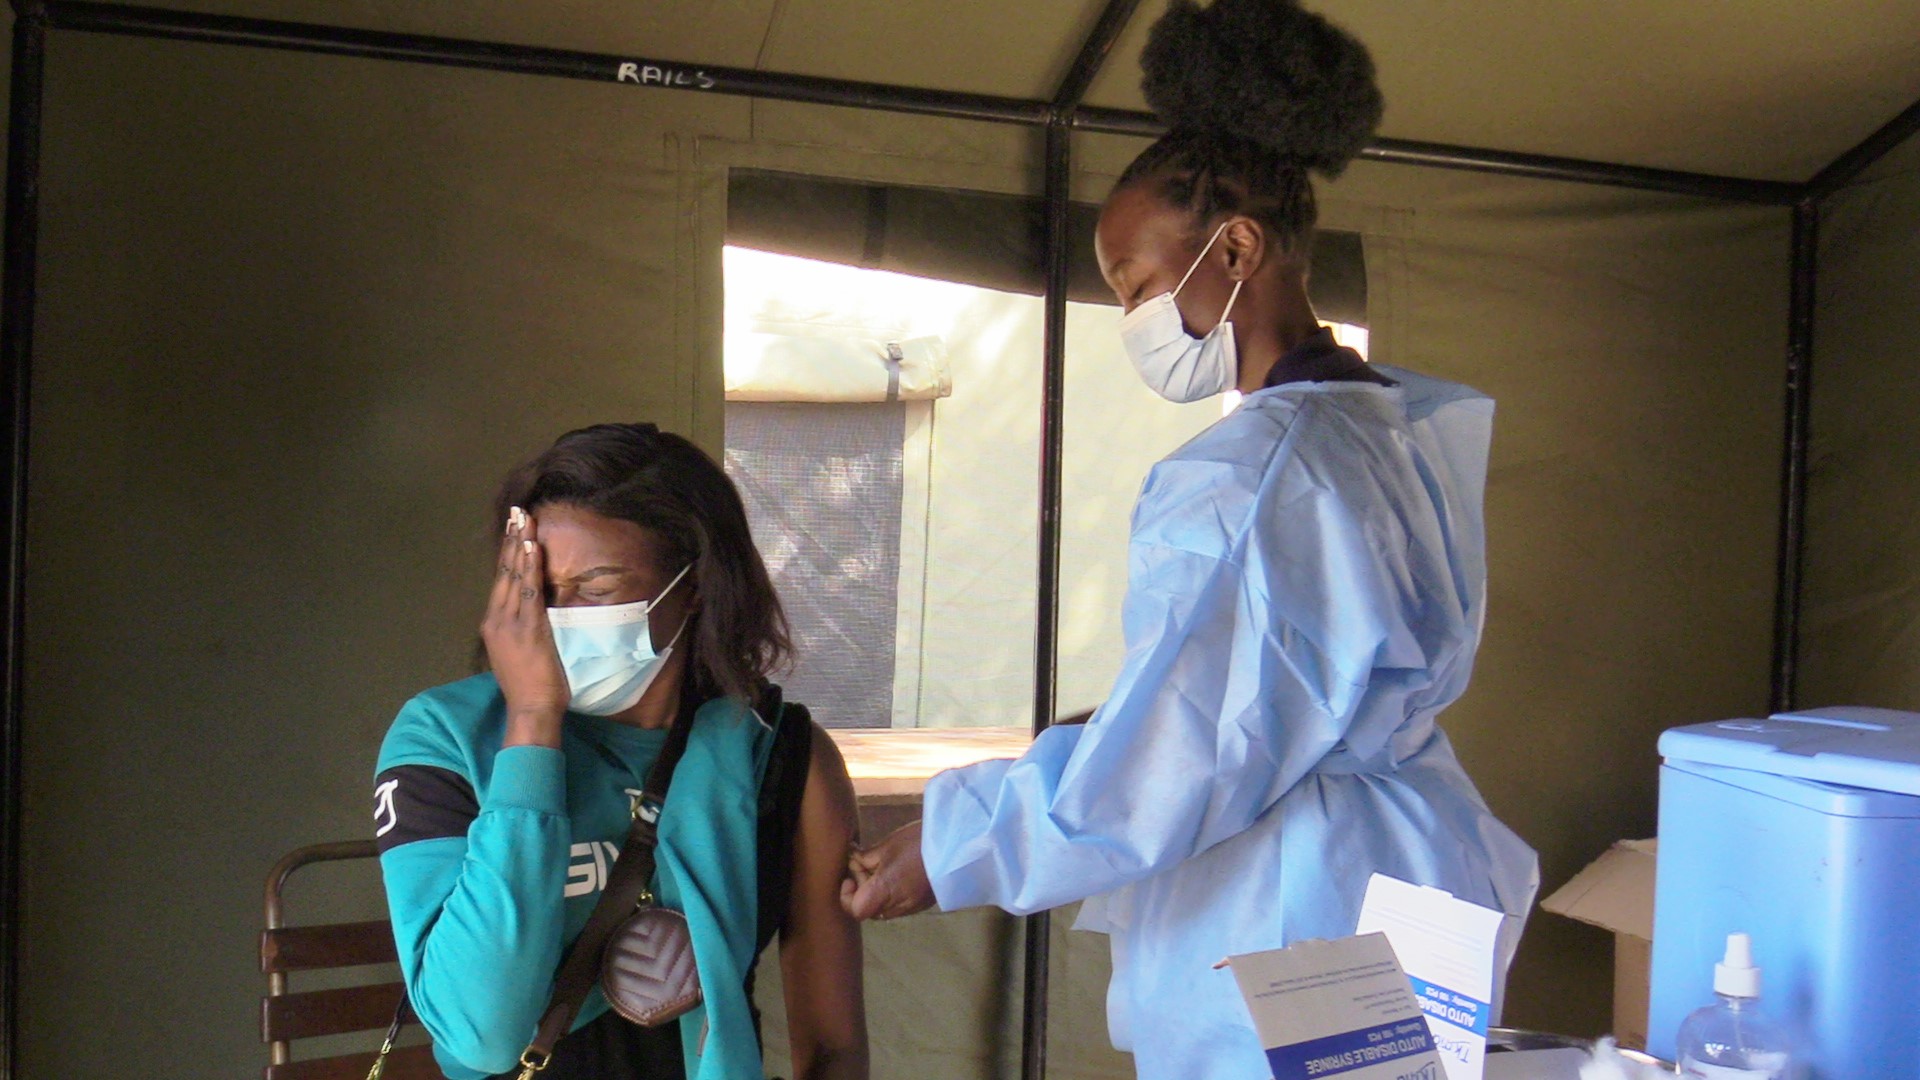 More ZC players, staff vaccinated against COVID-19